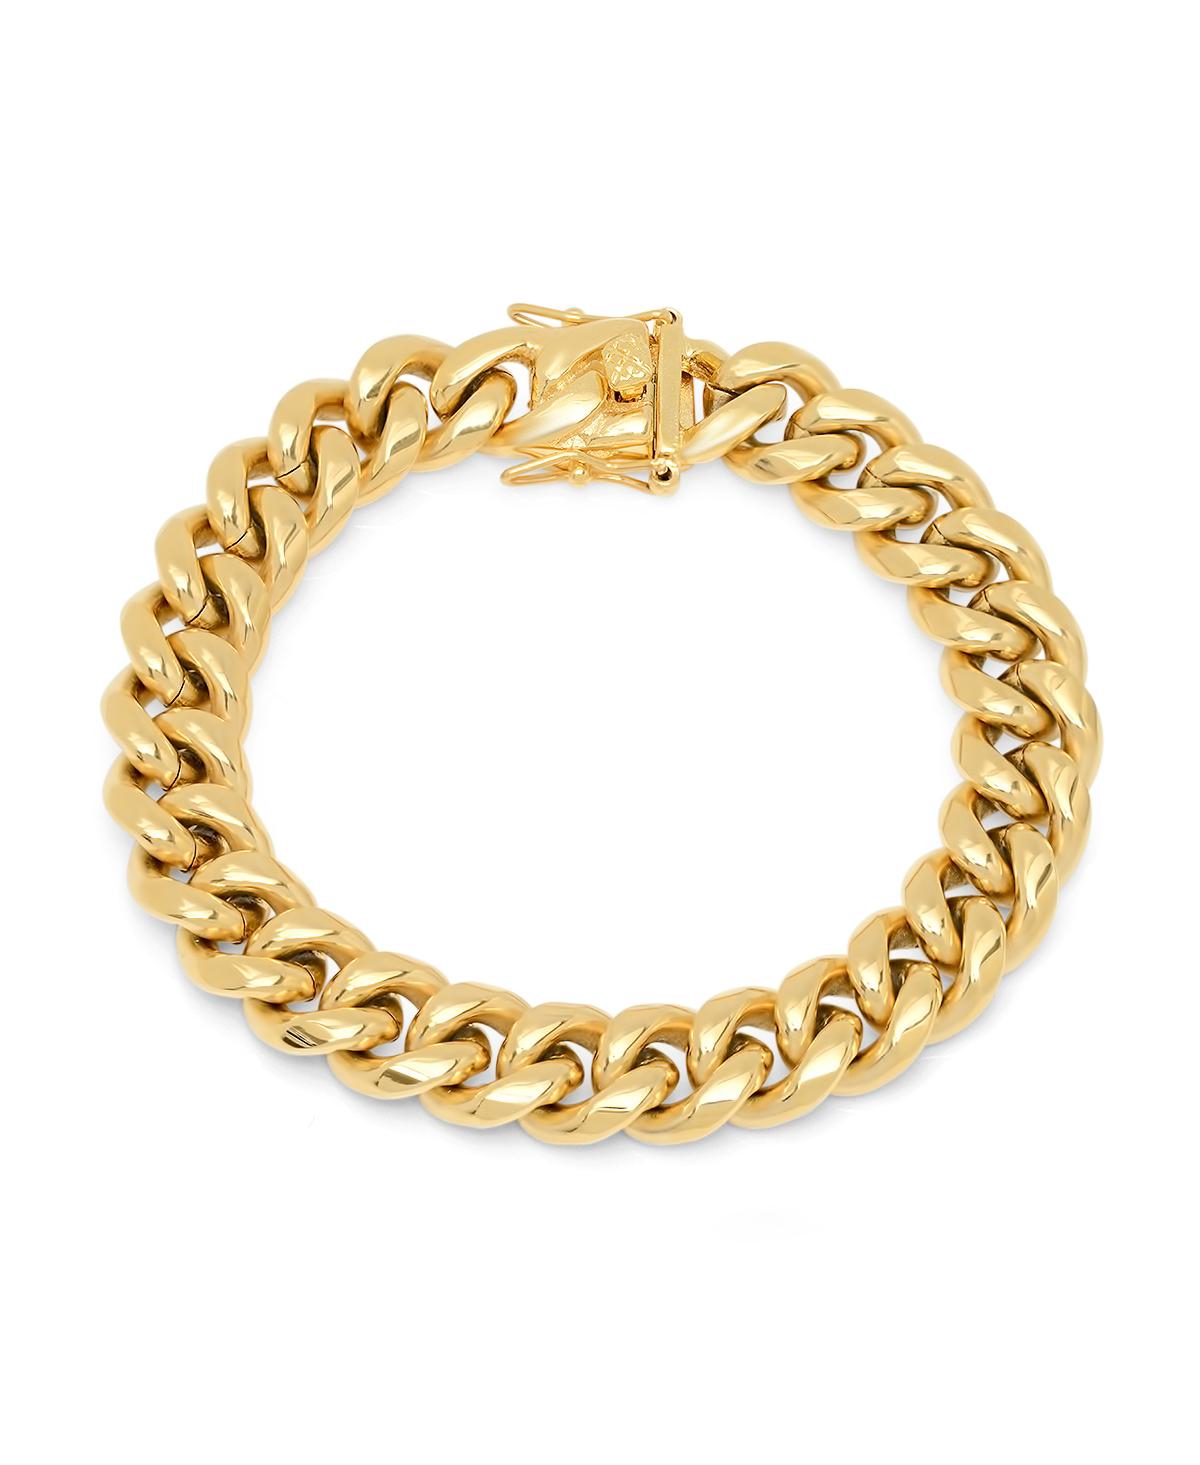 Men's 18k gold Plated Stainless Steel Miami Cuban Chain Link Style Bracelet with 12mm Box Clasp Bracelet - Gold